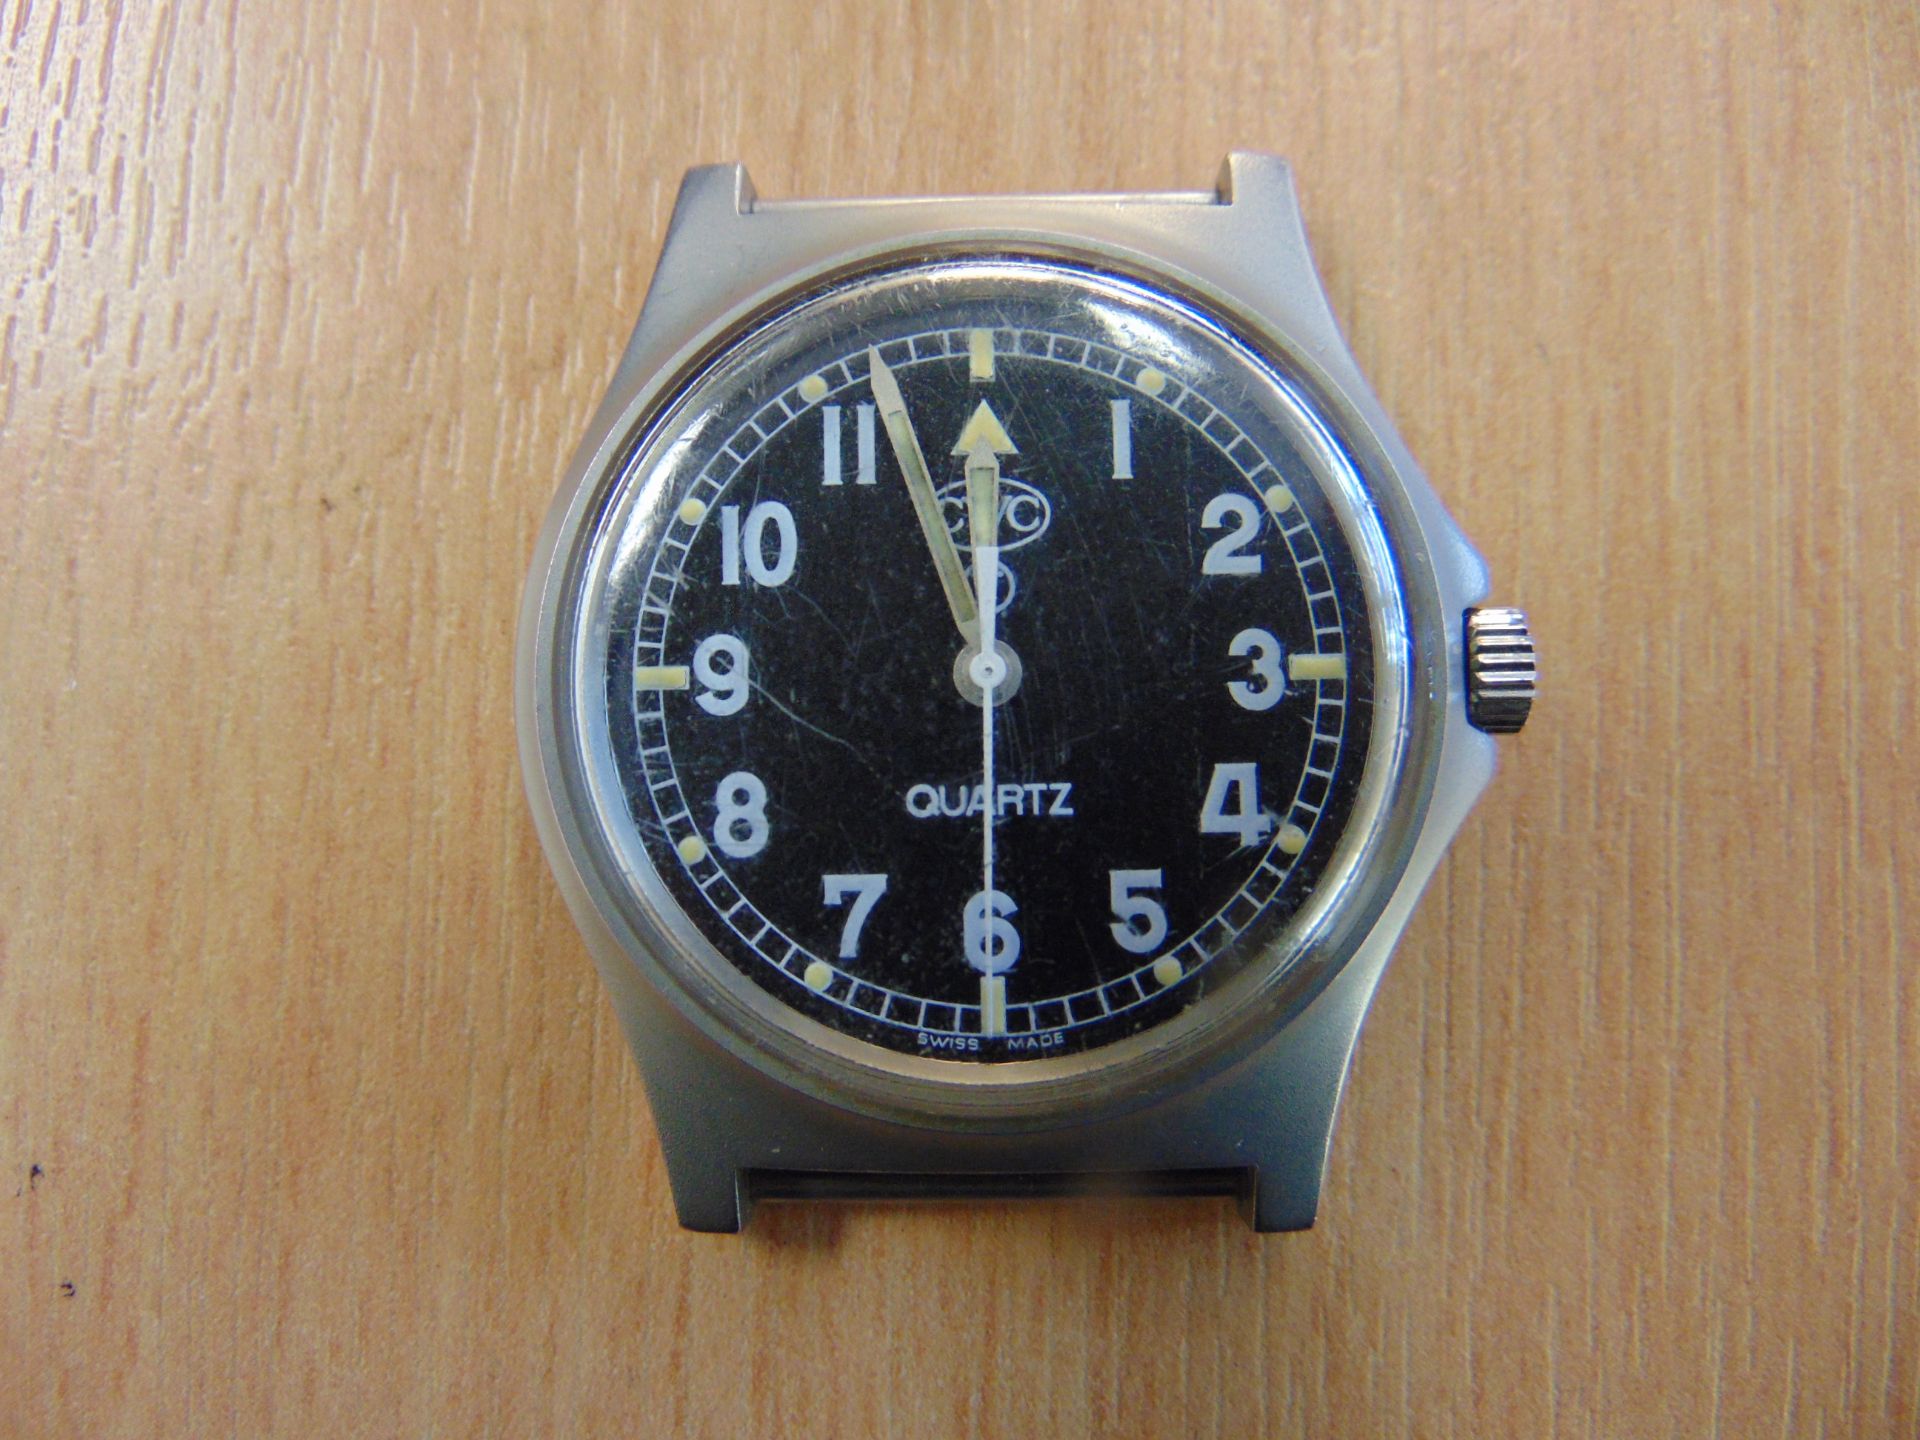 VERY NICE CWC W10 SERVICE WATCH WATER PROOF TO 5 ATM NATO MARKED DATED 2006 - Image 6 of 12